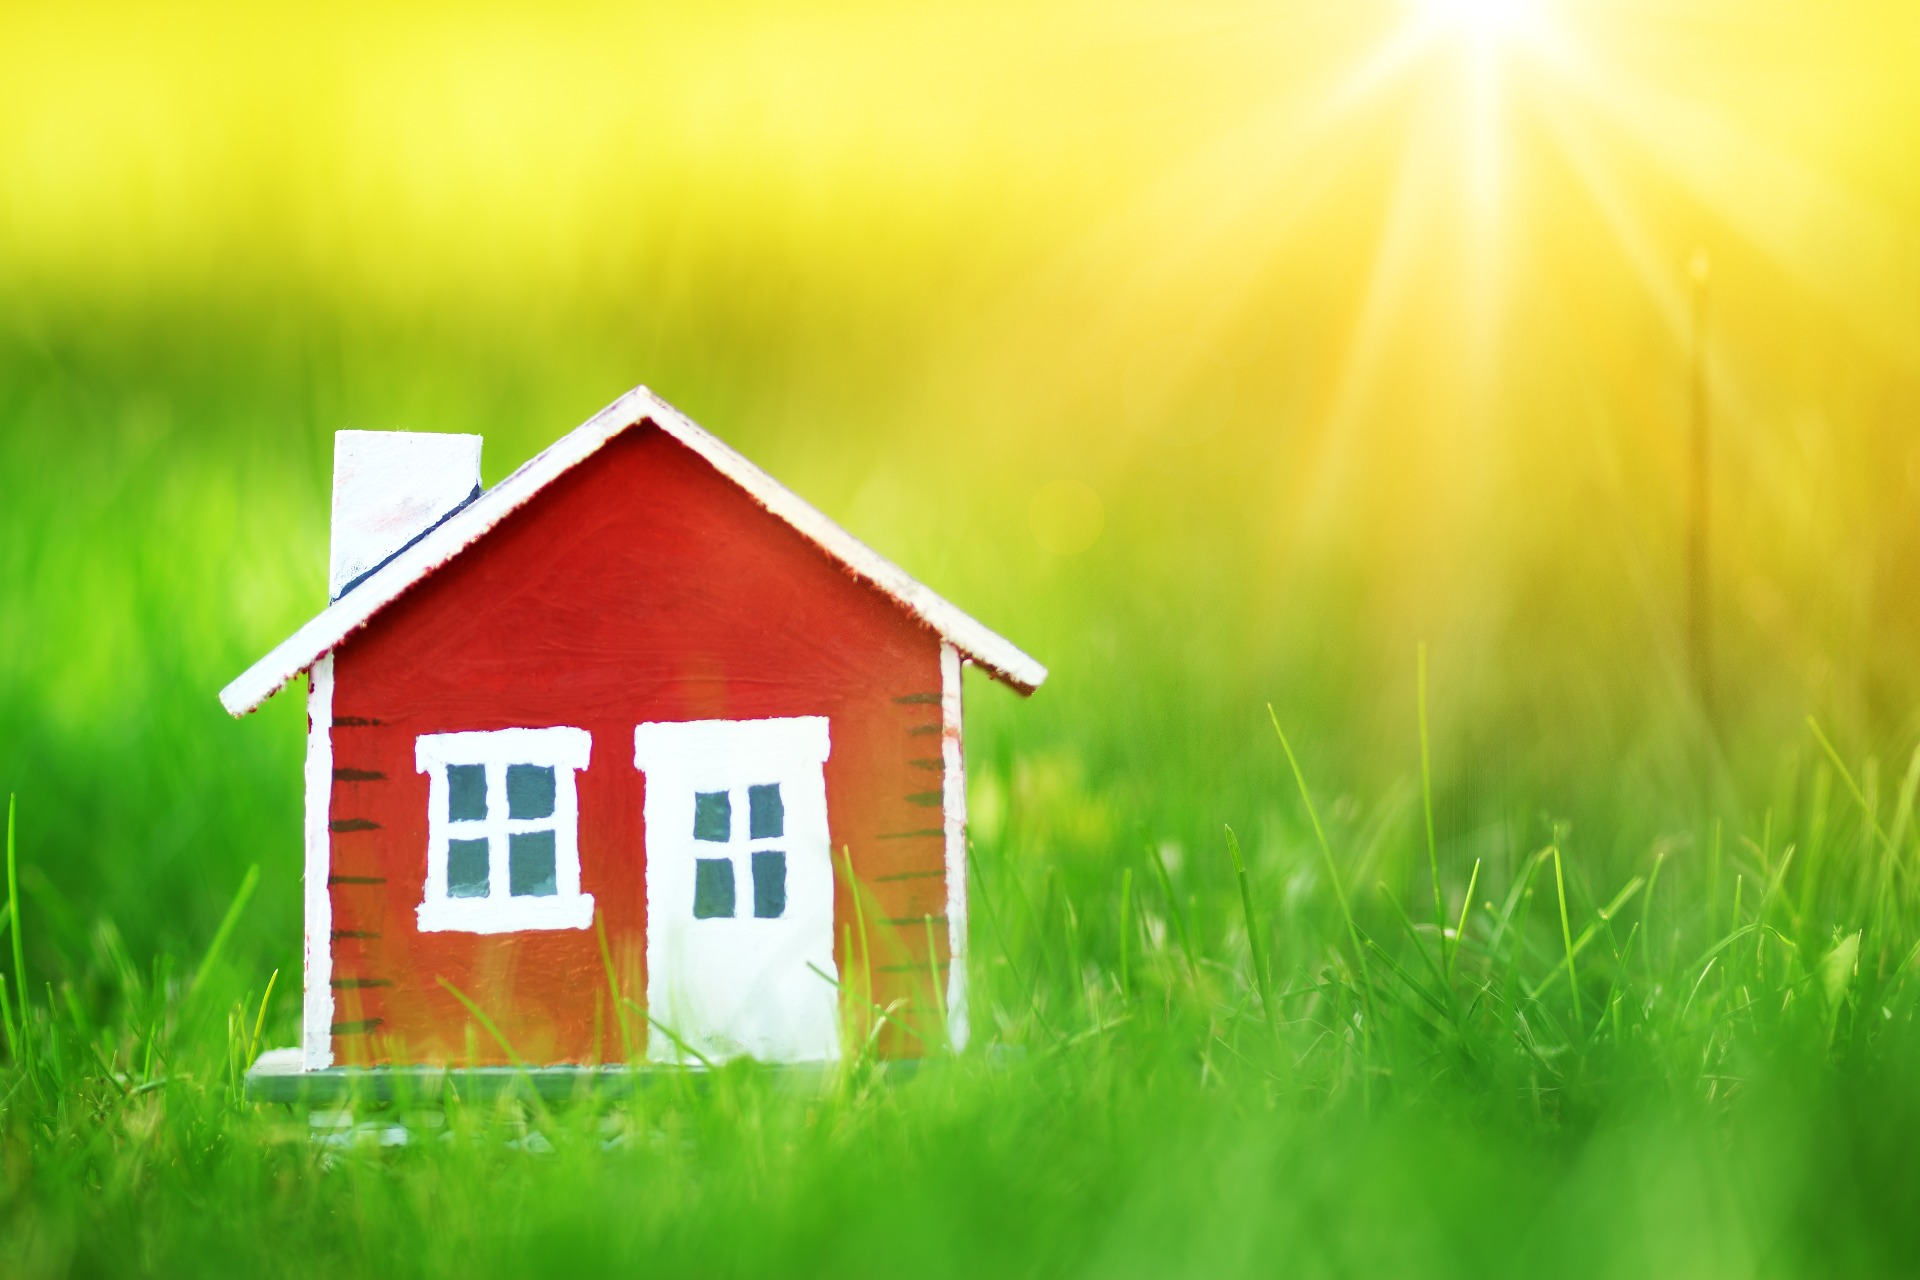 A little house on a field with the sun shining through; our Conveyancing Solicitors in Lancaster, based on 1 Westbourne Road, Lancaster, LA1 5DB, discuss buying a house with a septic tank.